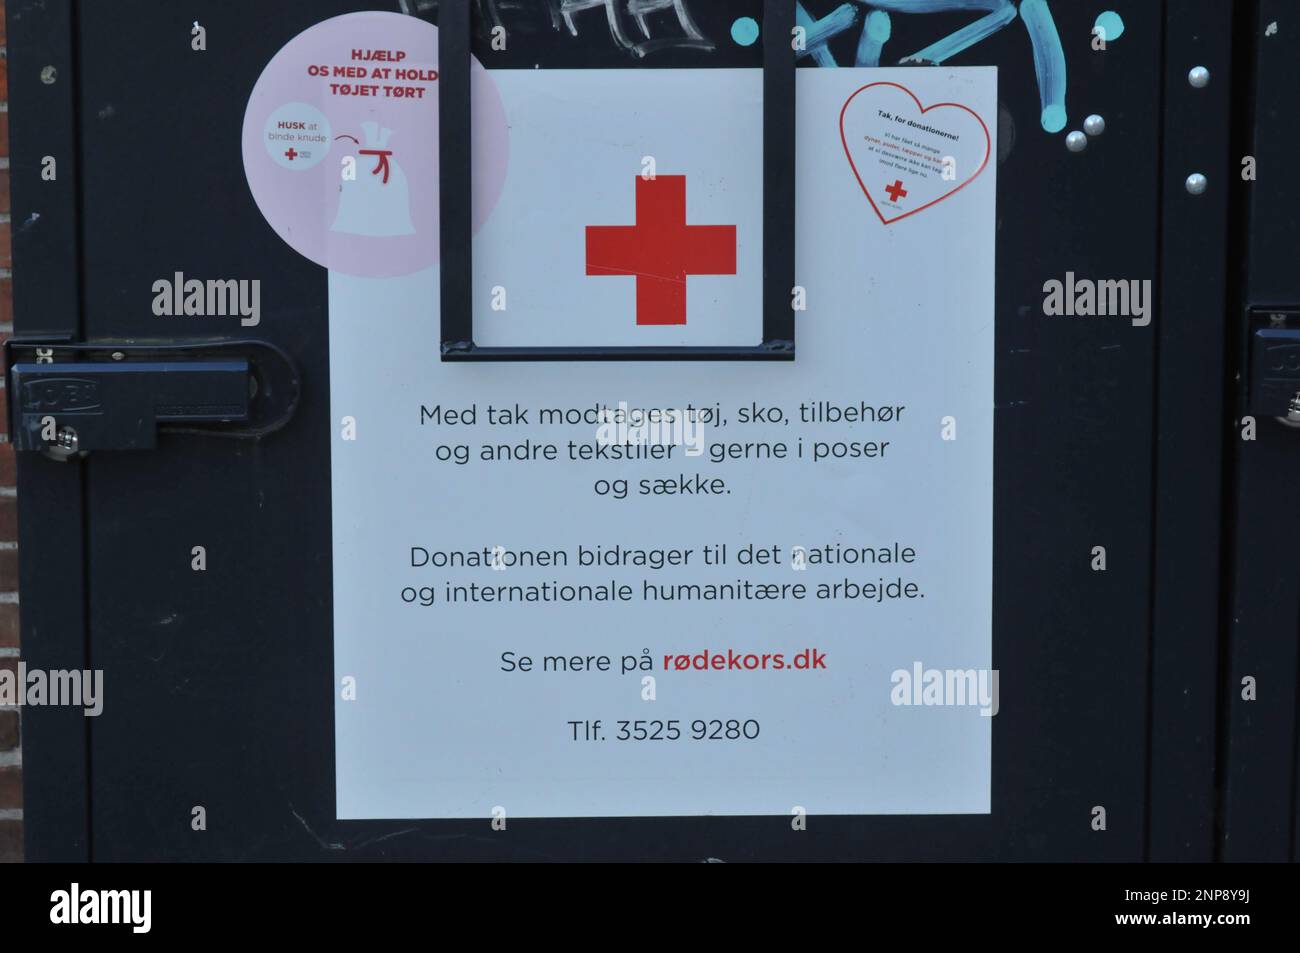 Red cross chairty container stock and images - Alamy